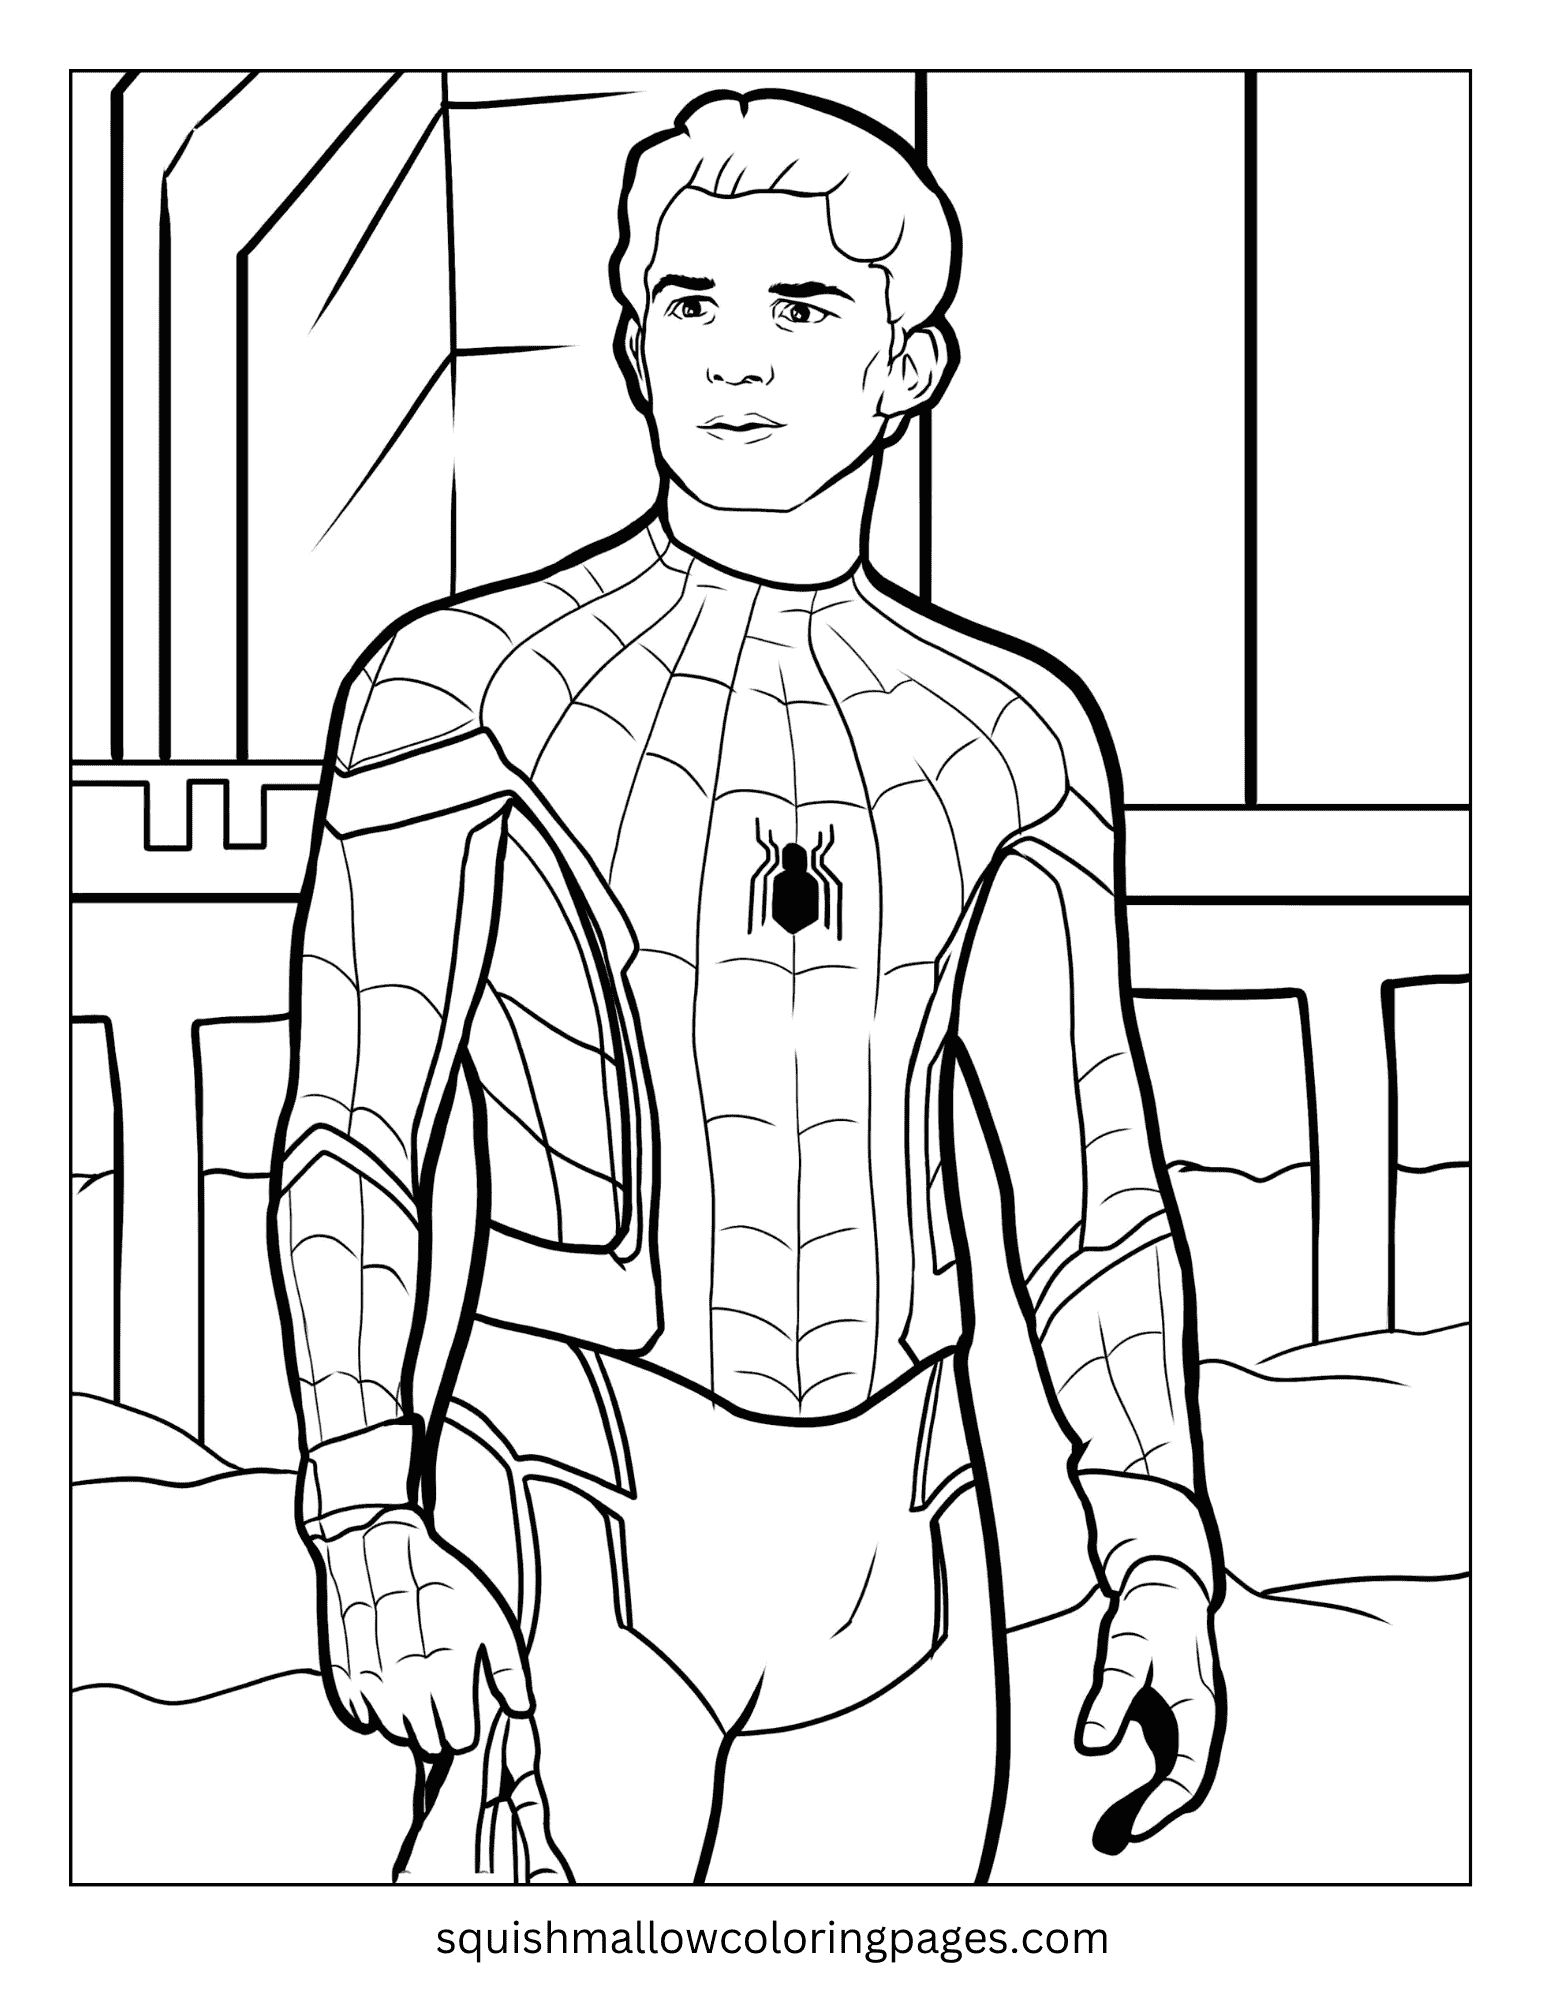 Tom Holland Peter Parker Spiderman coloring pages